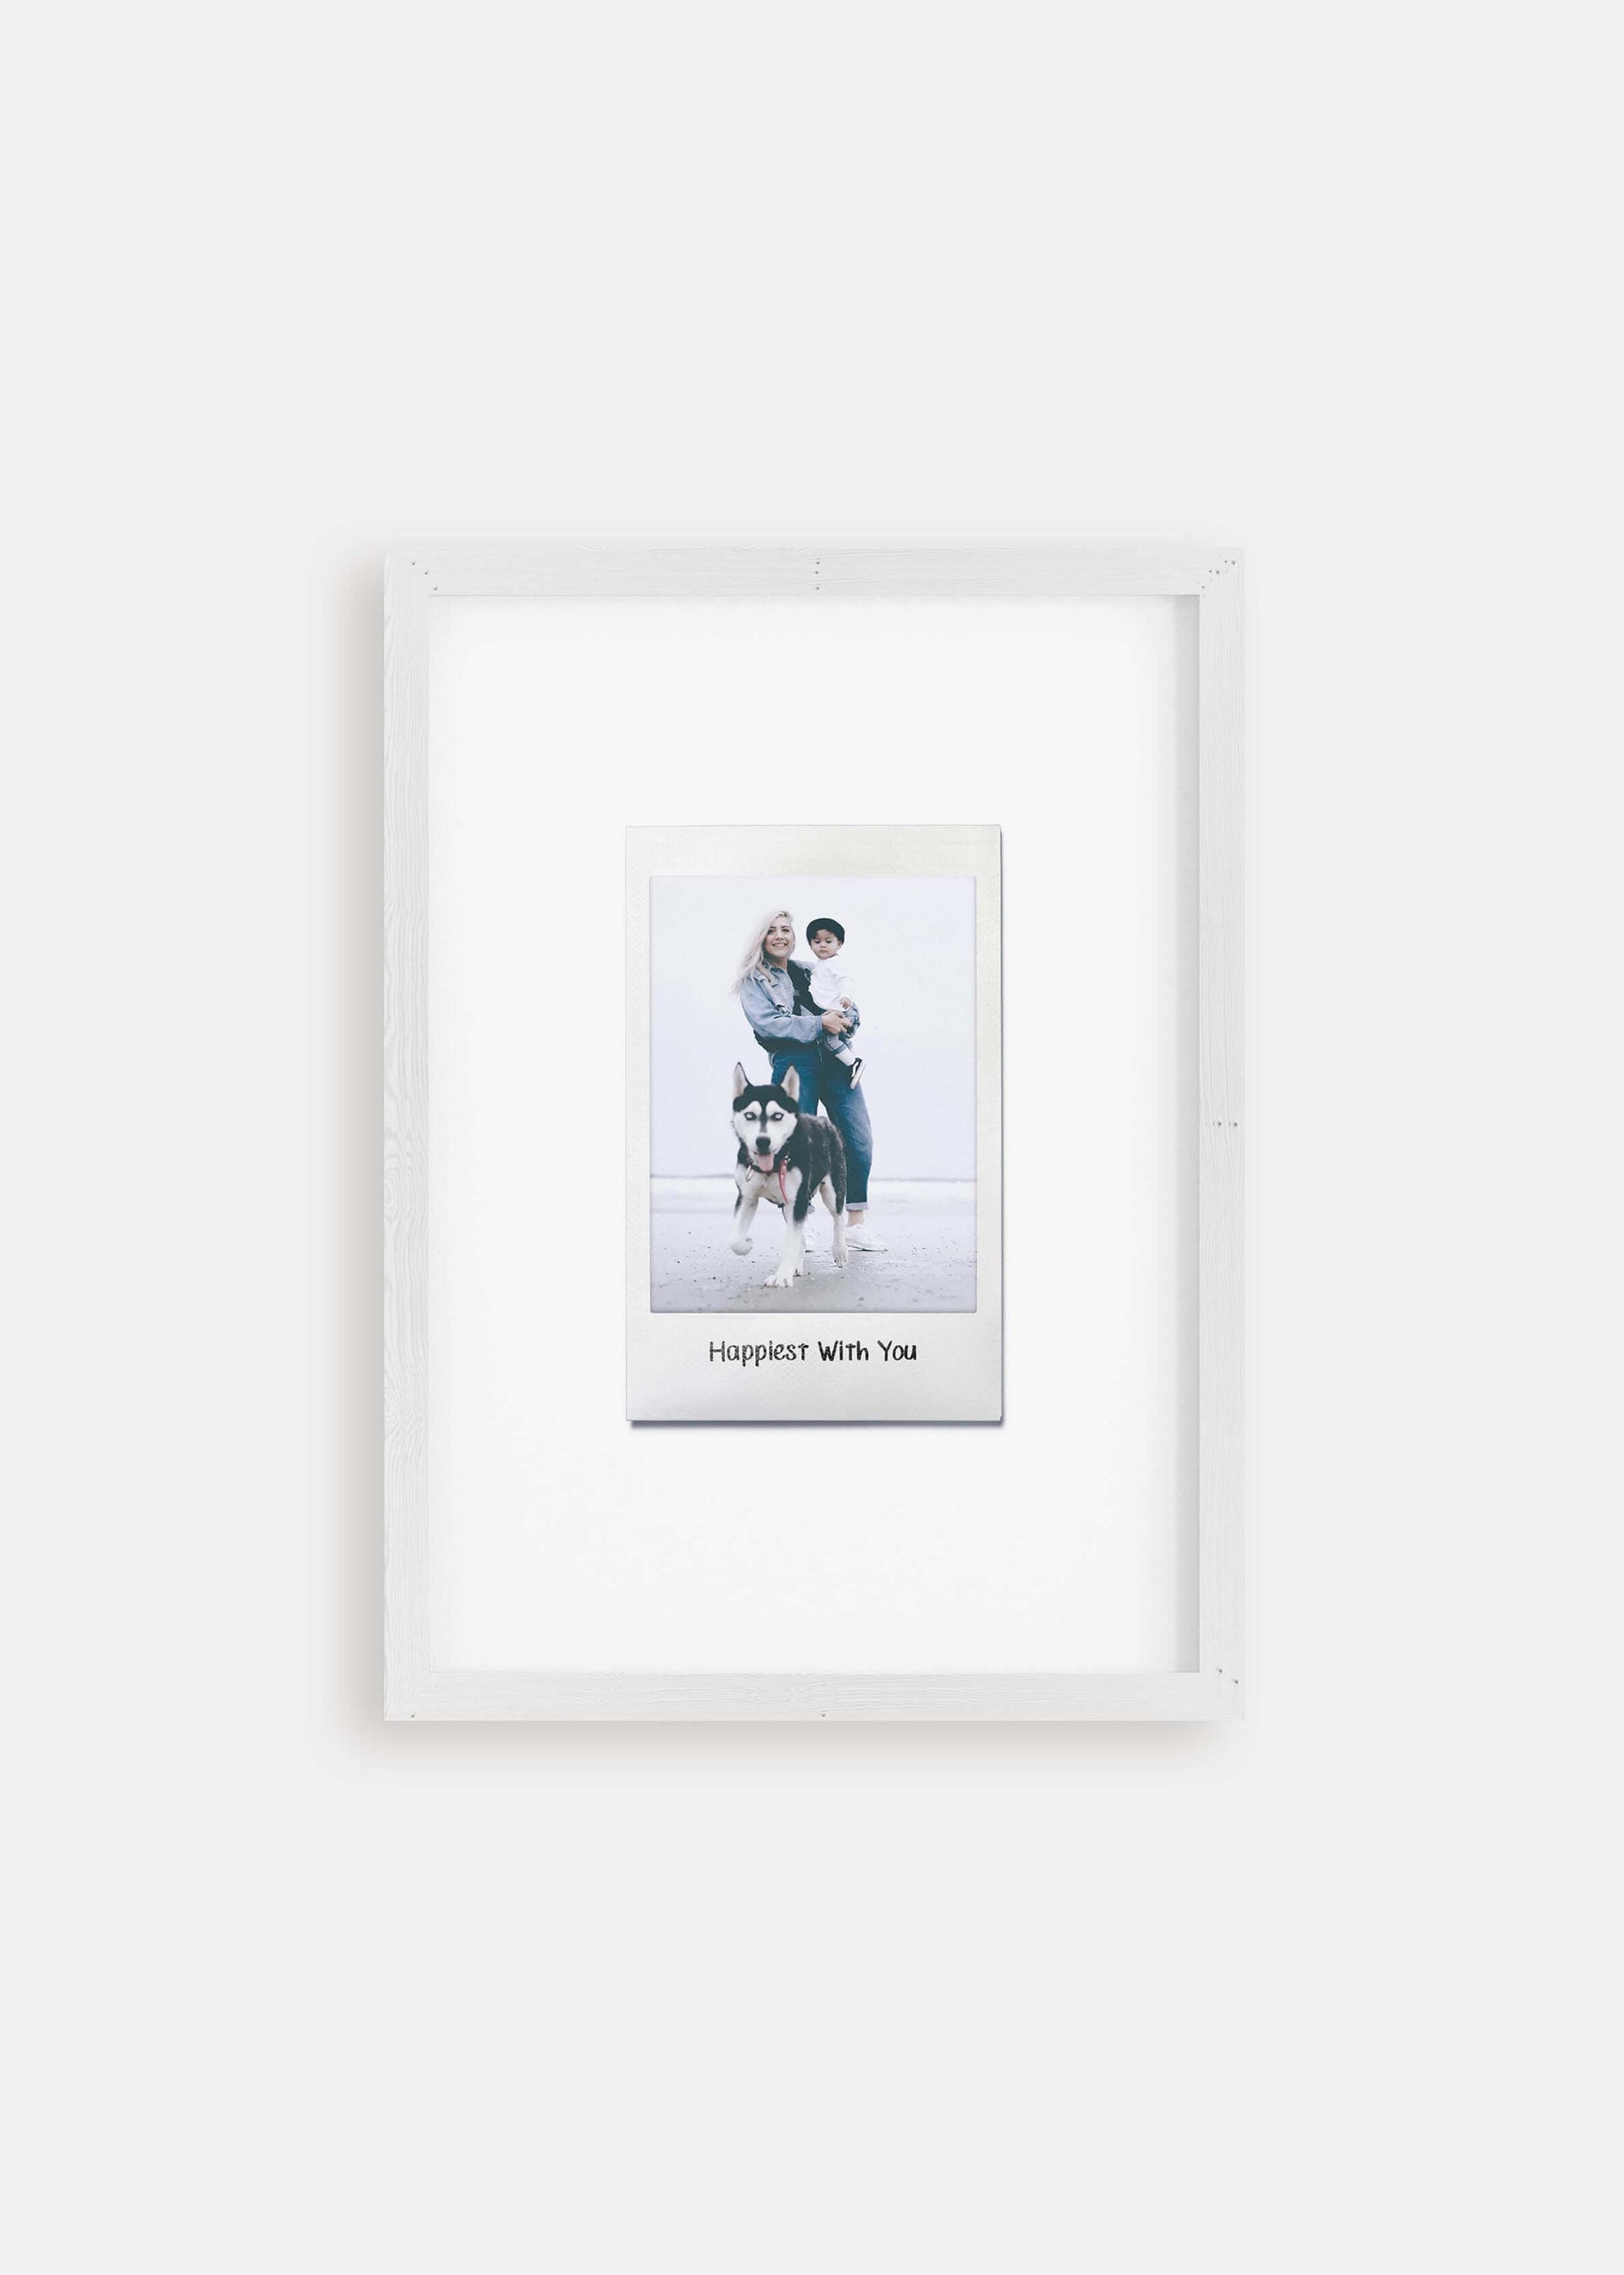 Personalized photo gift of a woman with her child and dog in a white frame in the style of a nostalgic instant film custom polaroid photo with frame on white background. The custom caption reads "Happiest with you".